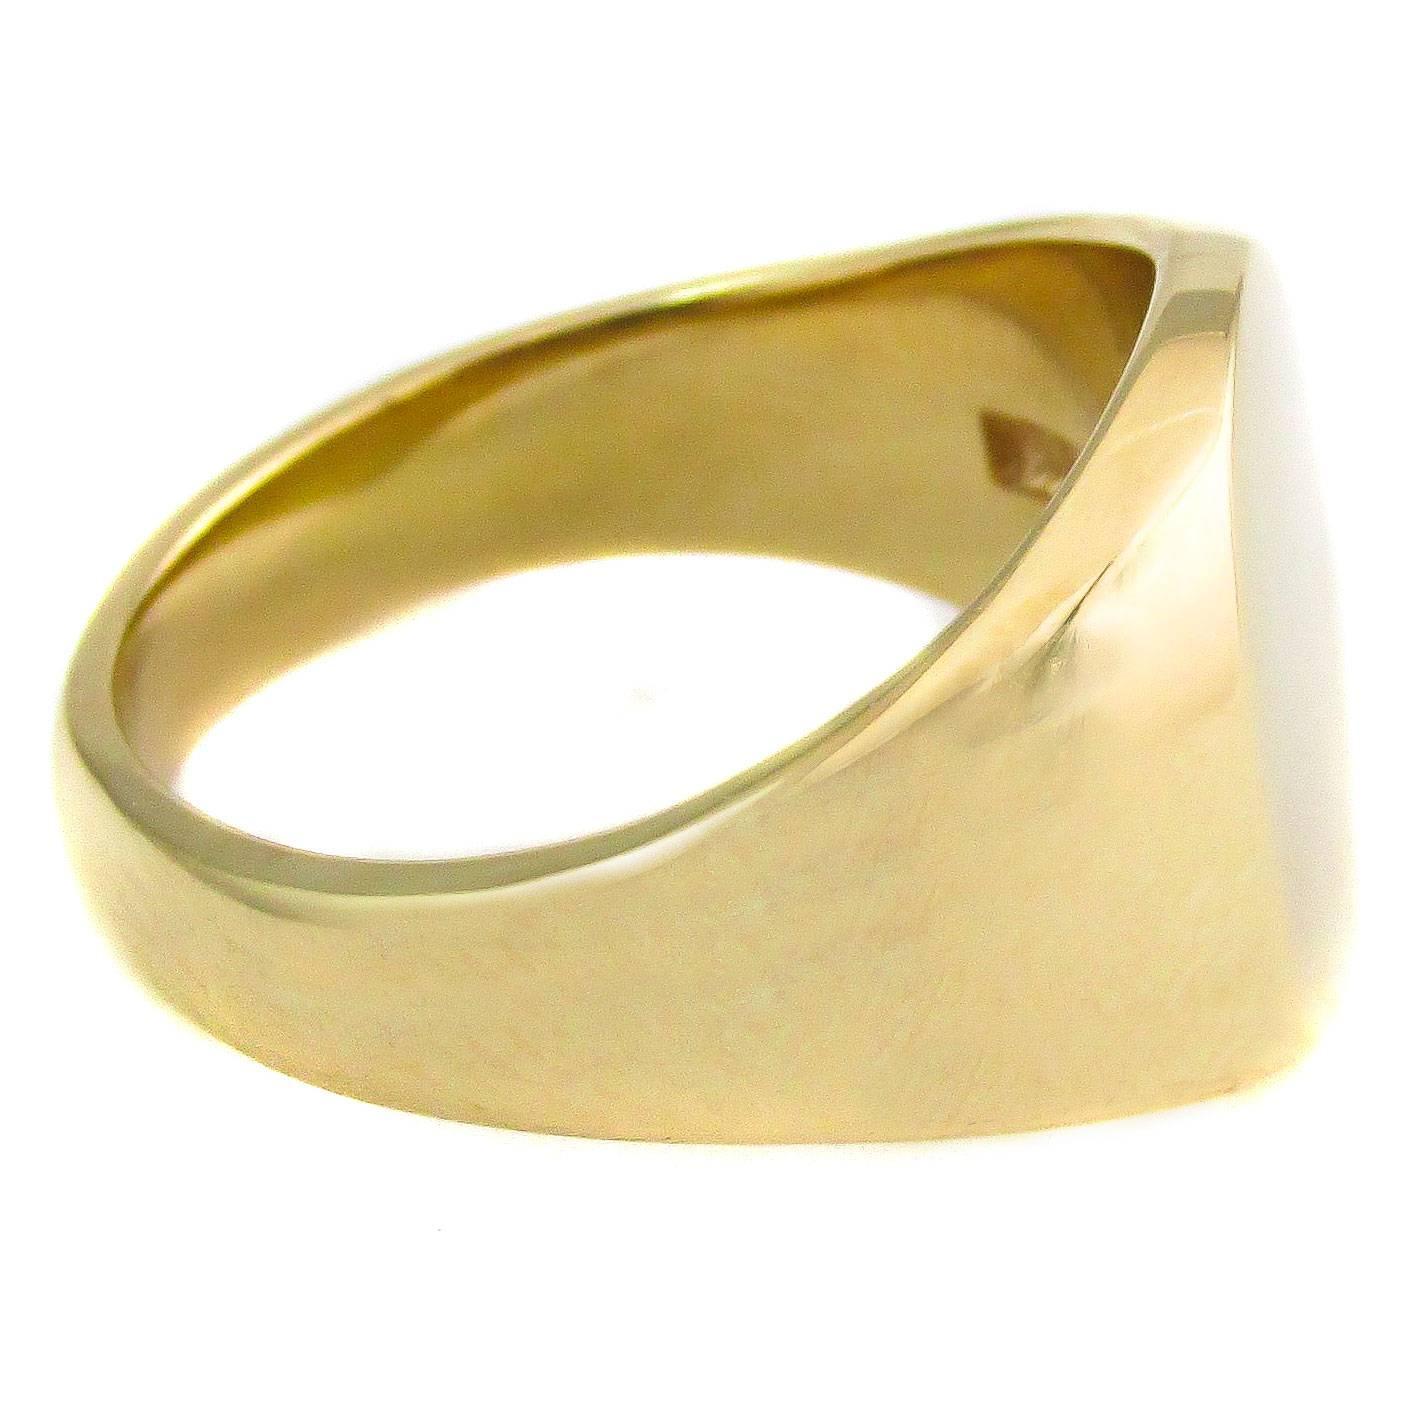 Tiffany and Co. Gold Signet Ring at 1stdibs